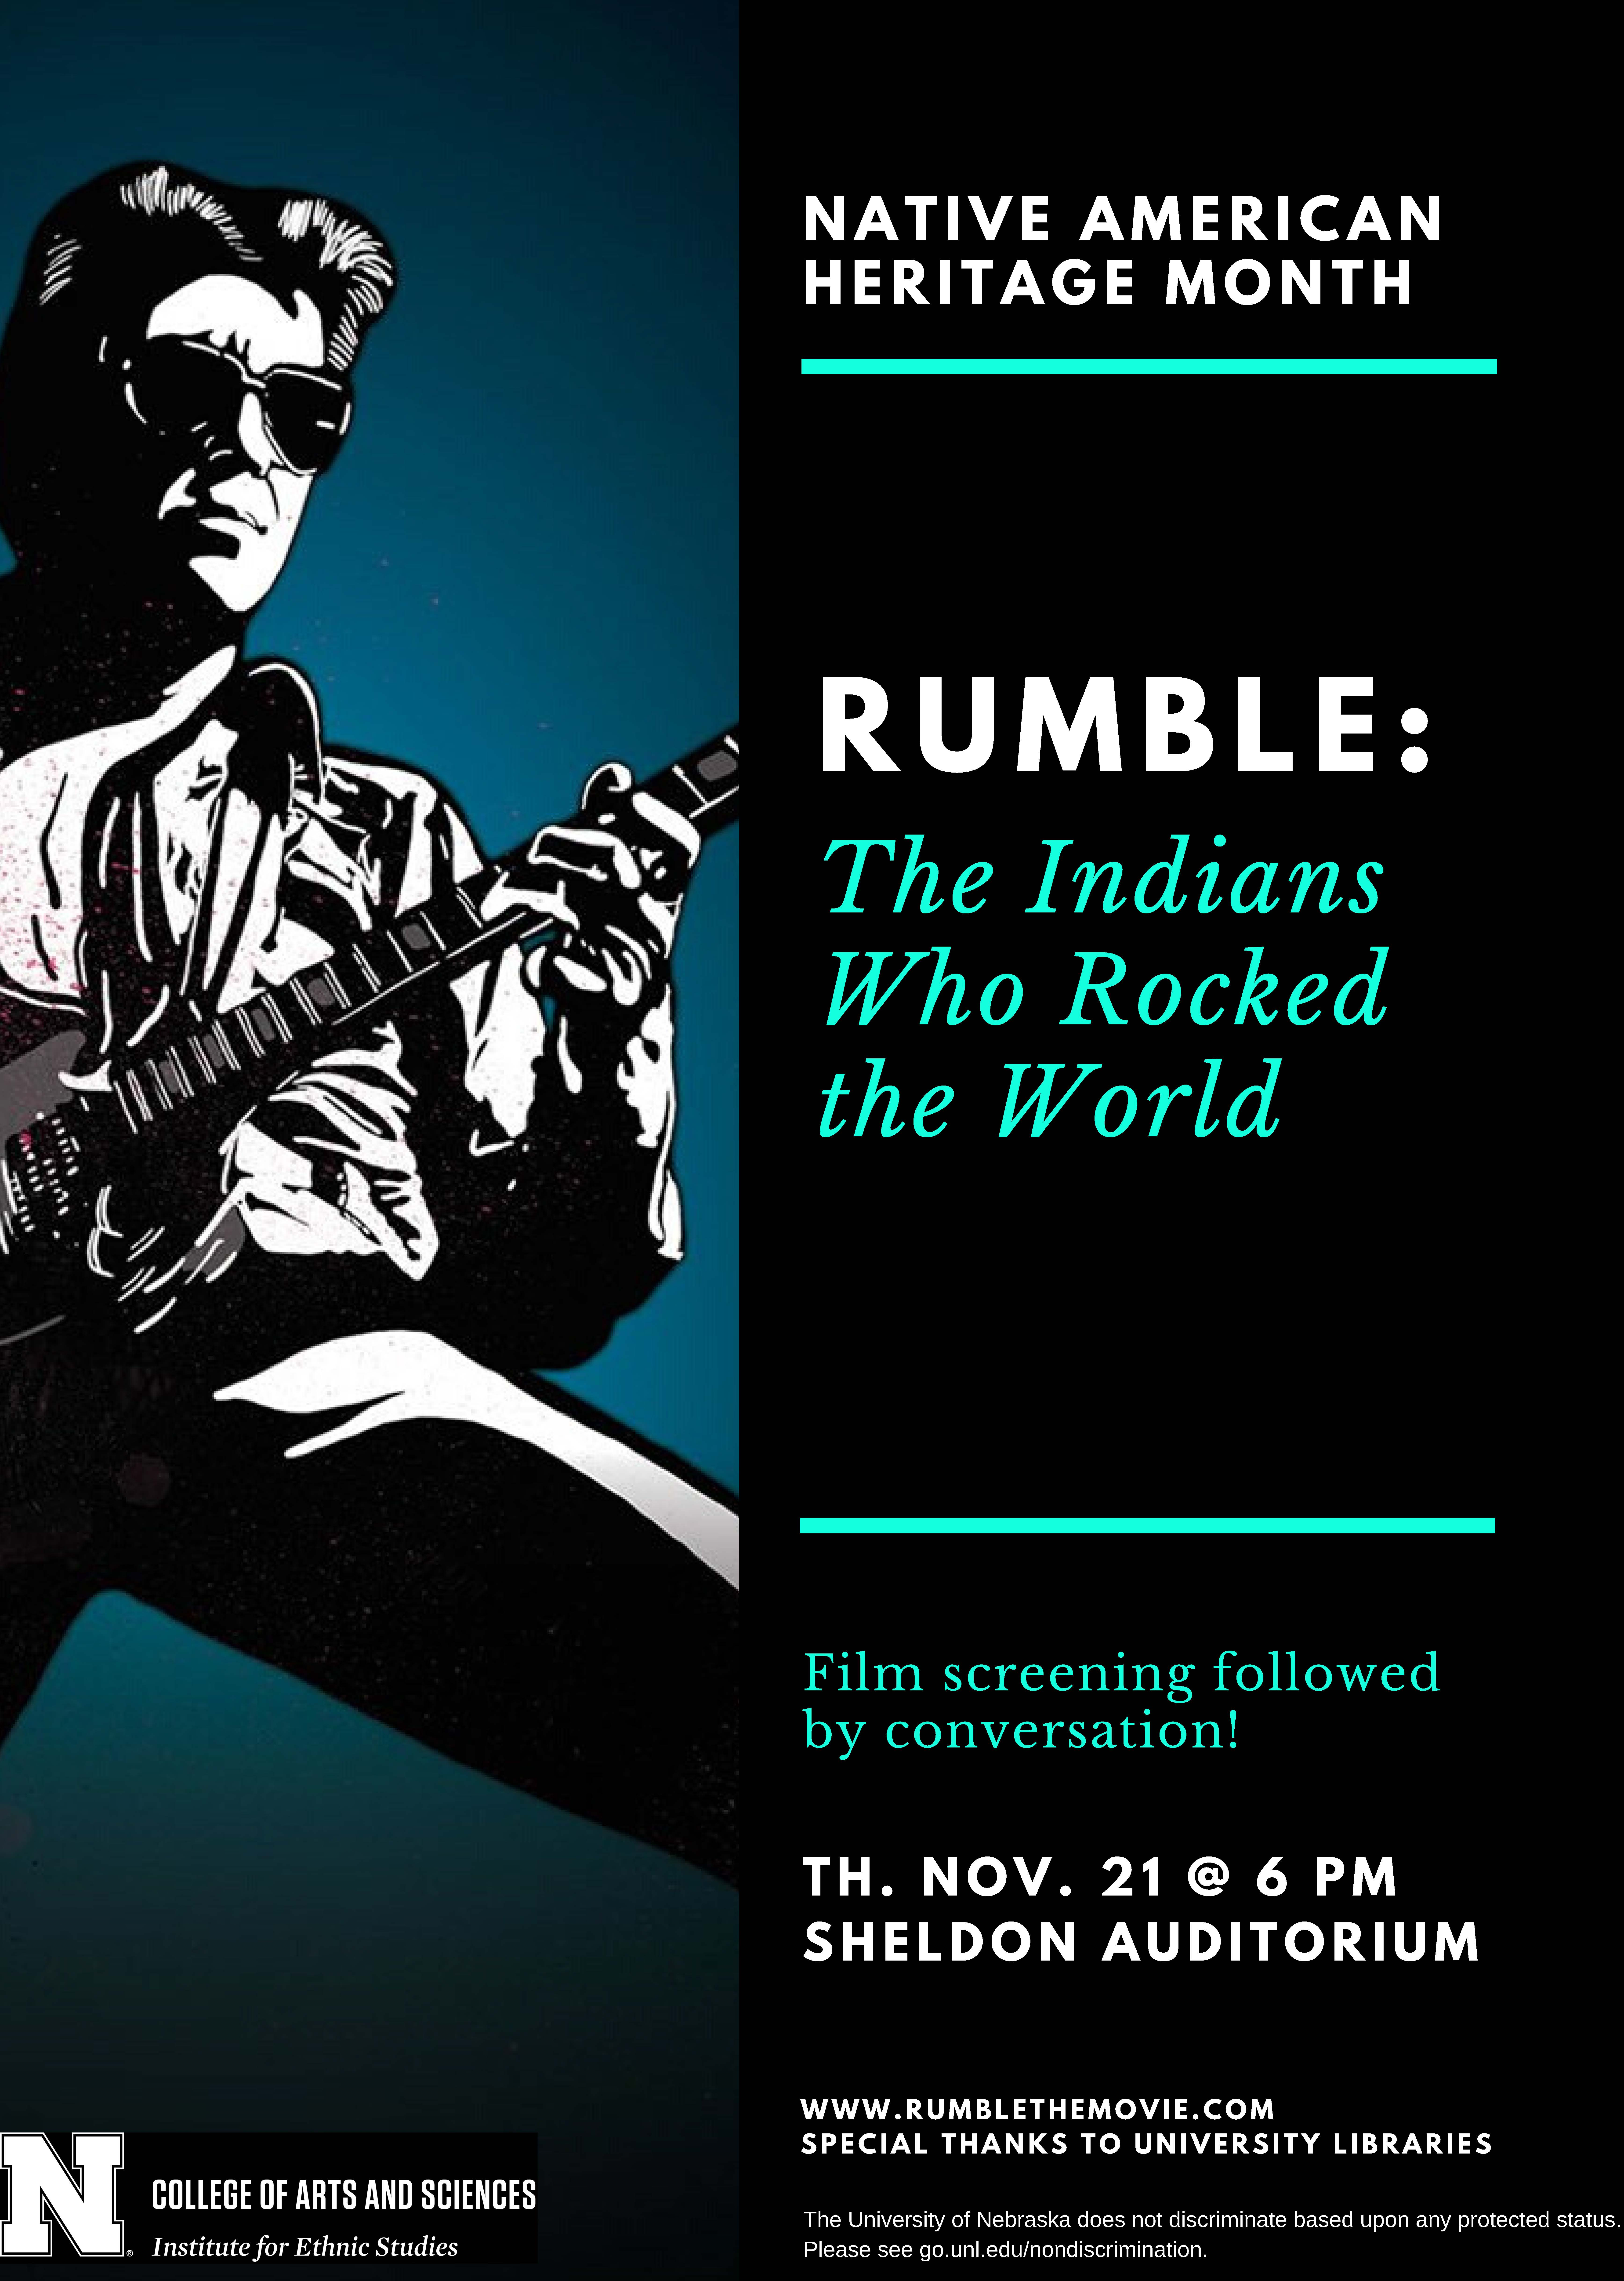 Screening of "Rumble: The Indians Who Rocked the World"